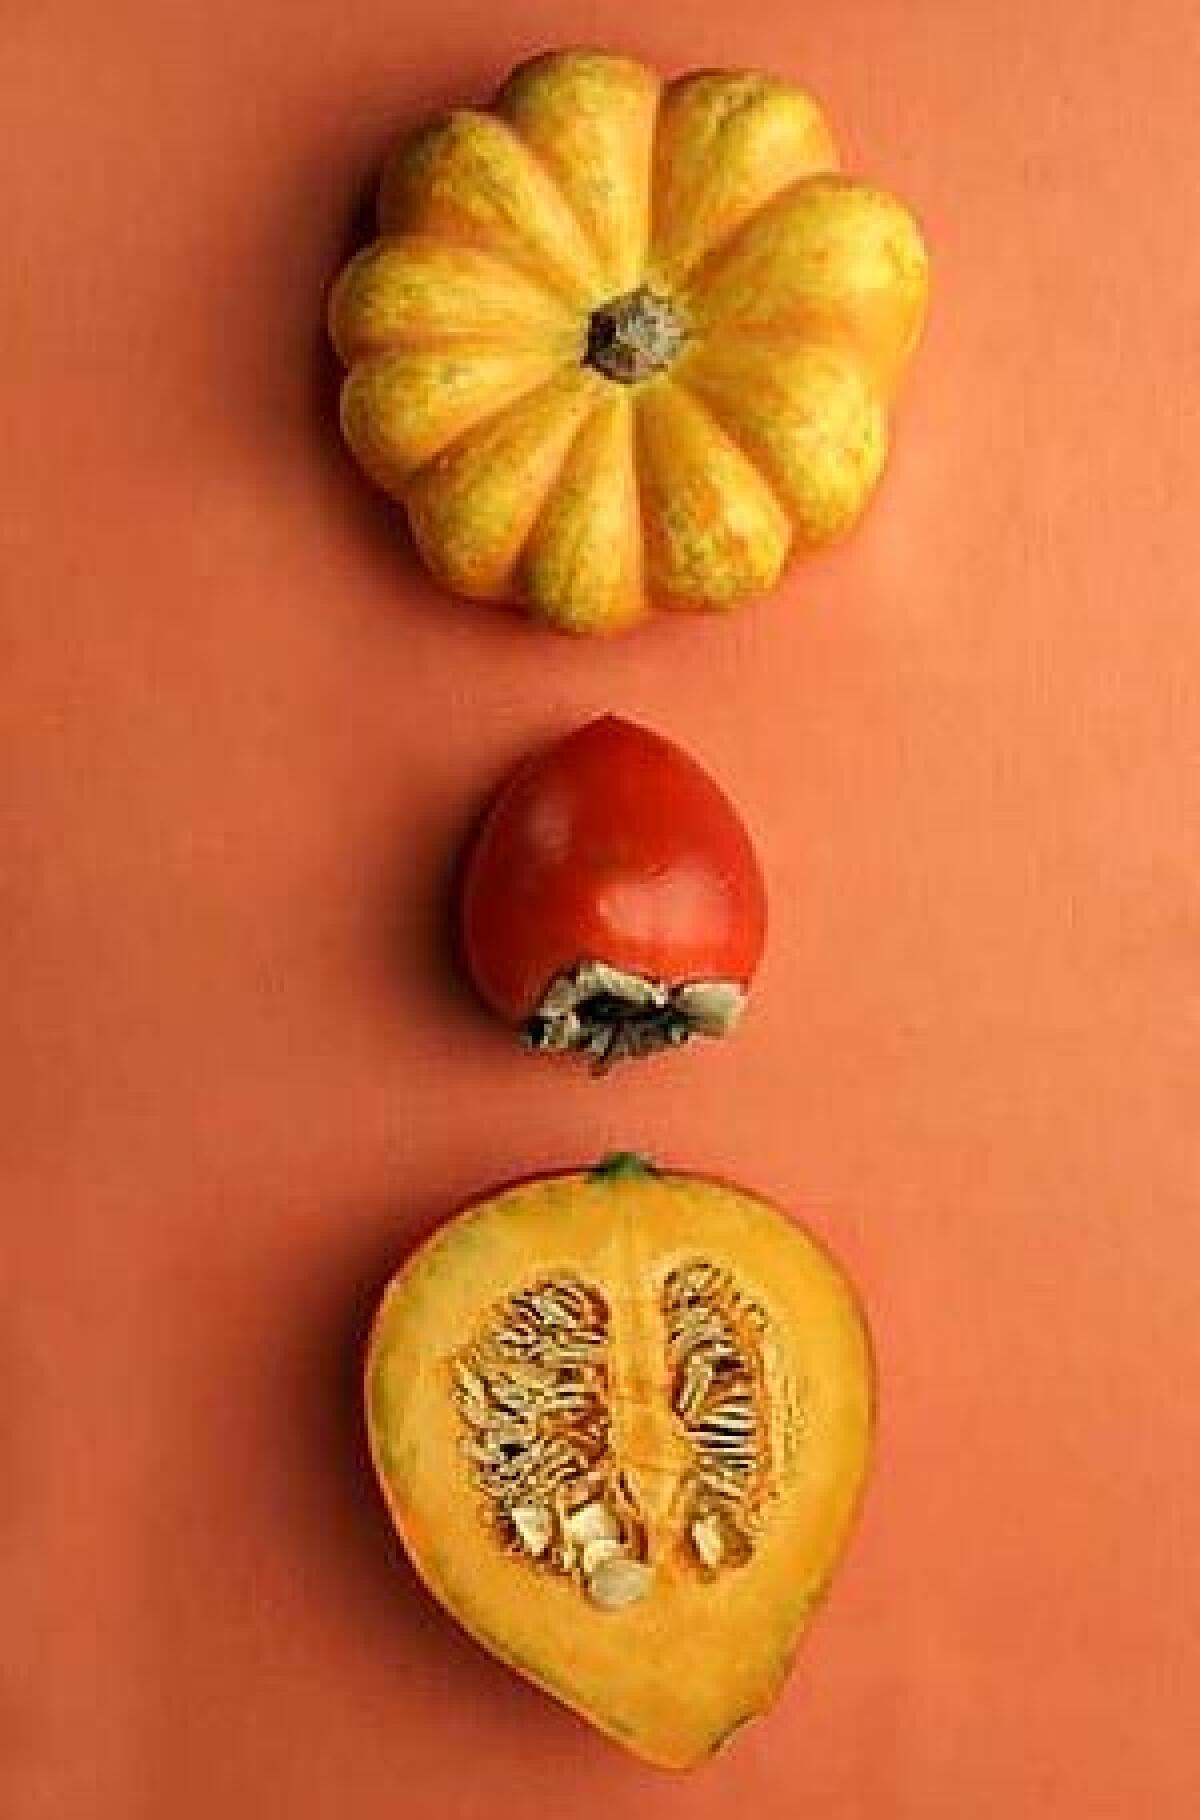 Squash, such as sweet dumpling, top, and red kuri, bottom, can be roasted, puréed or steamed. Hachiya persimmons, middle, make a quick dessert.